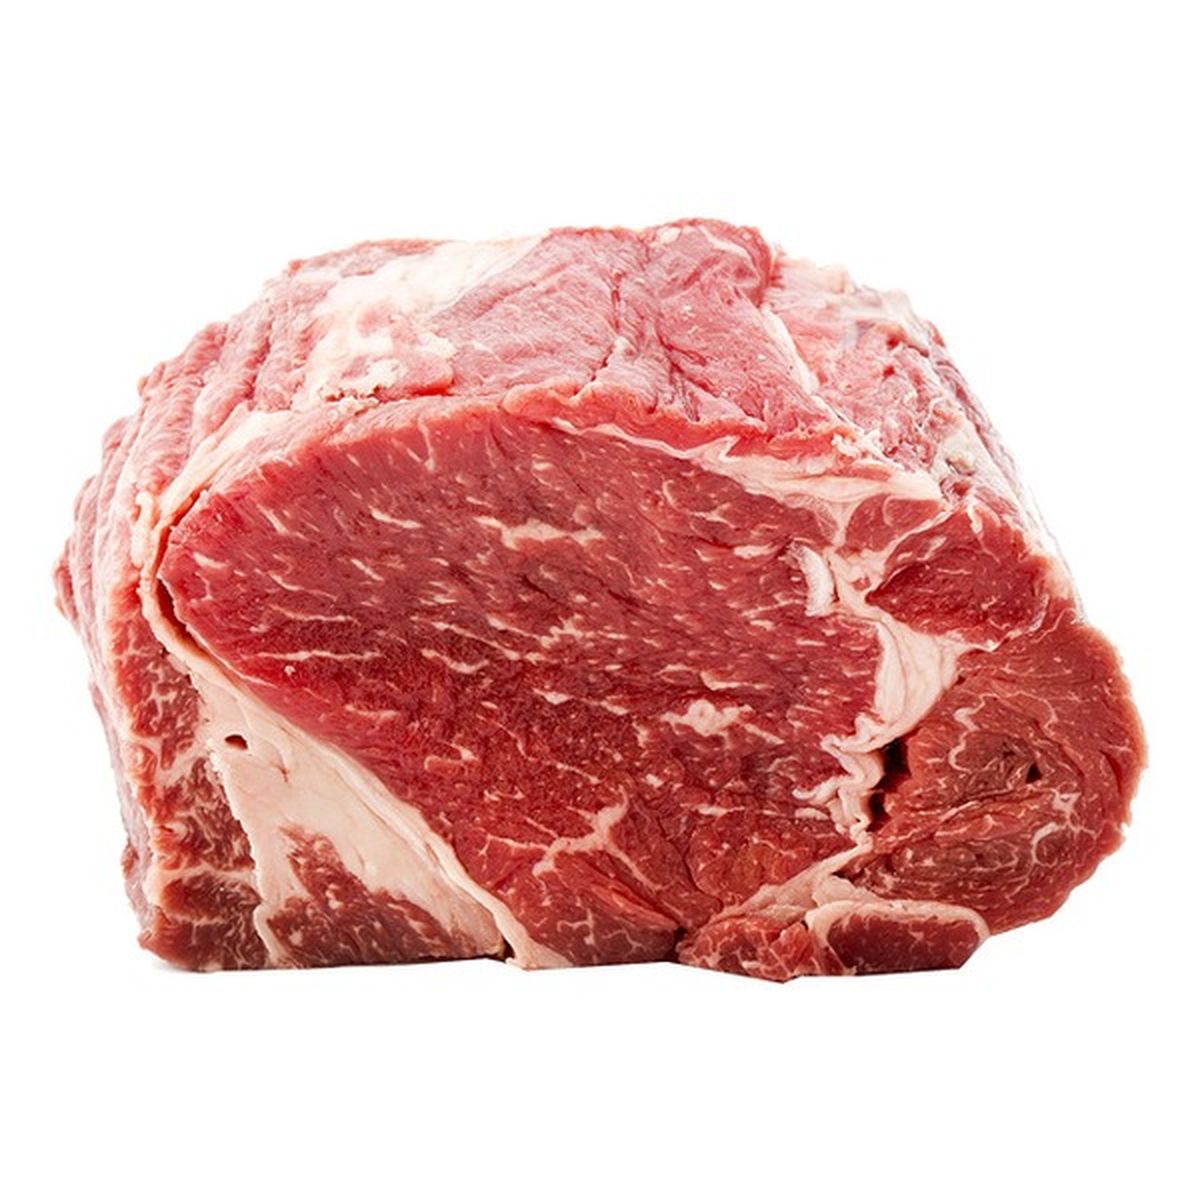 Ungraded Beef (also known as Veal) Rib Steaks – L&M Meat Distributing Inc.